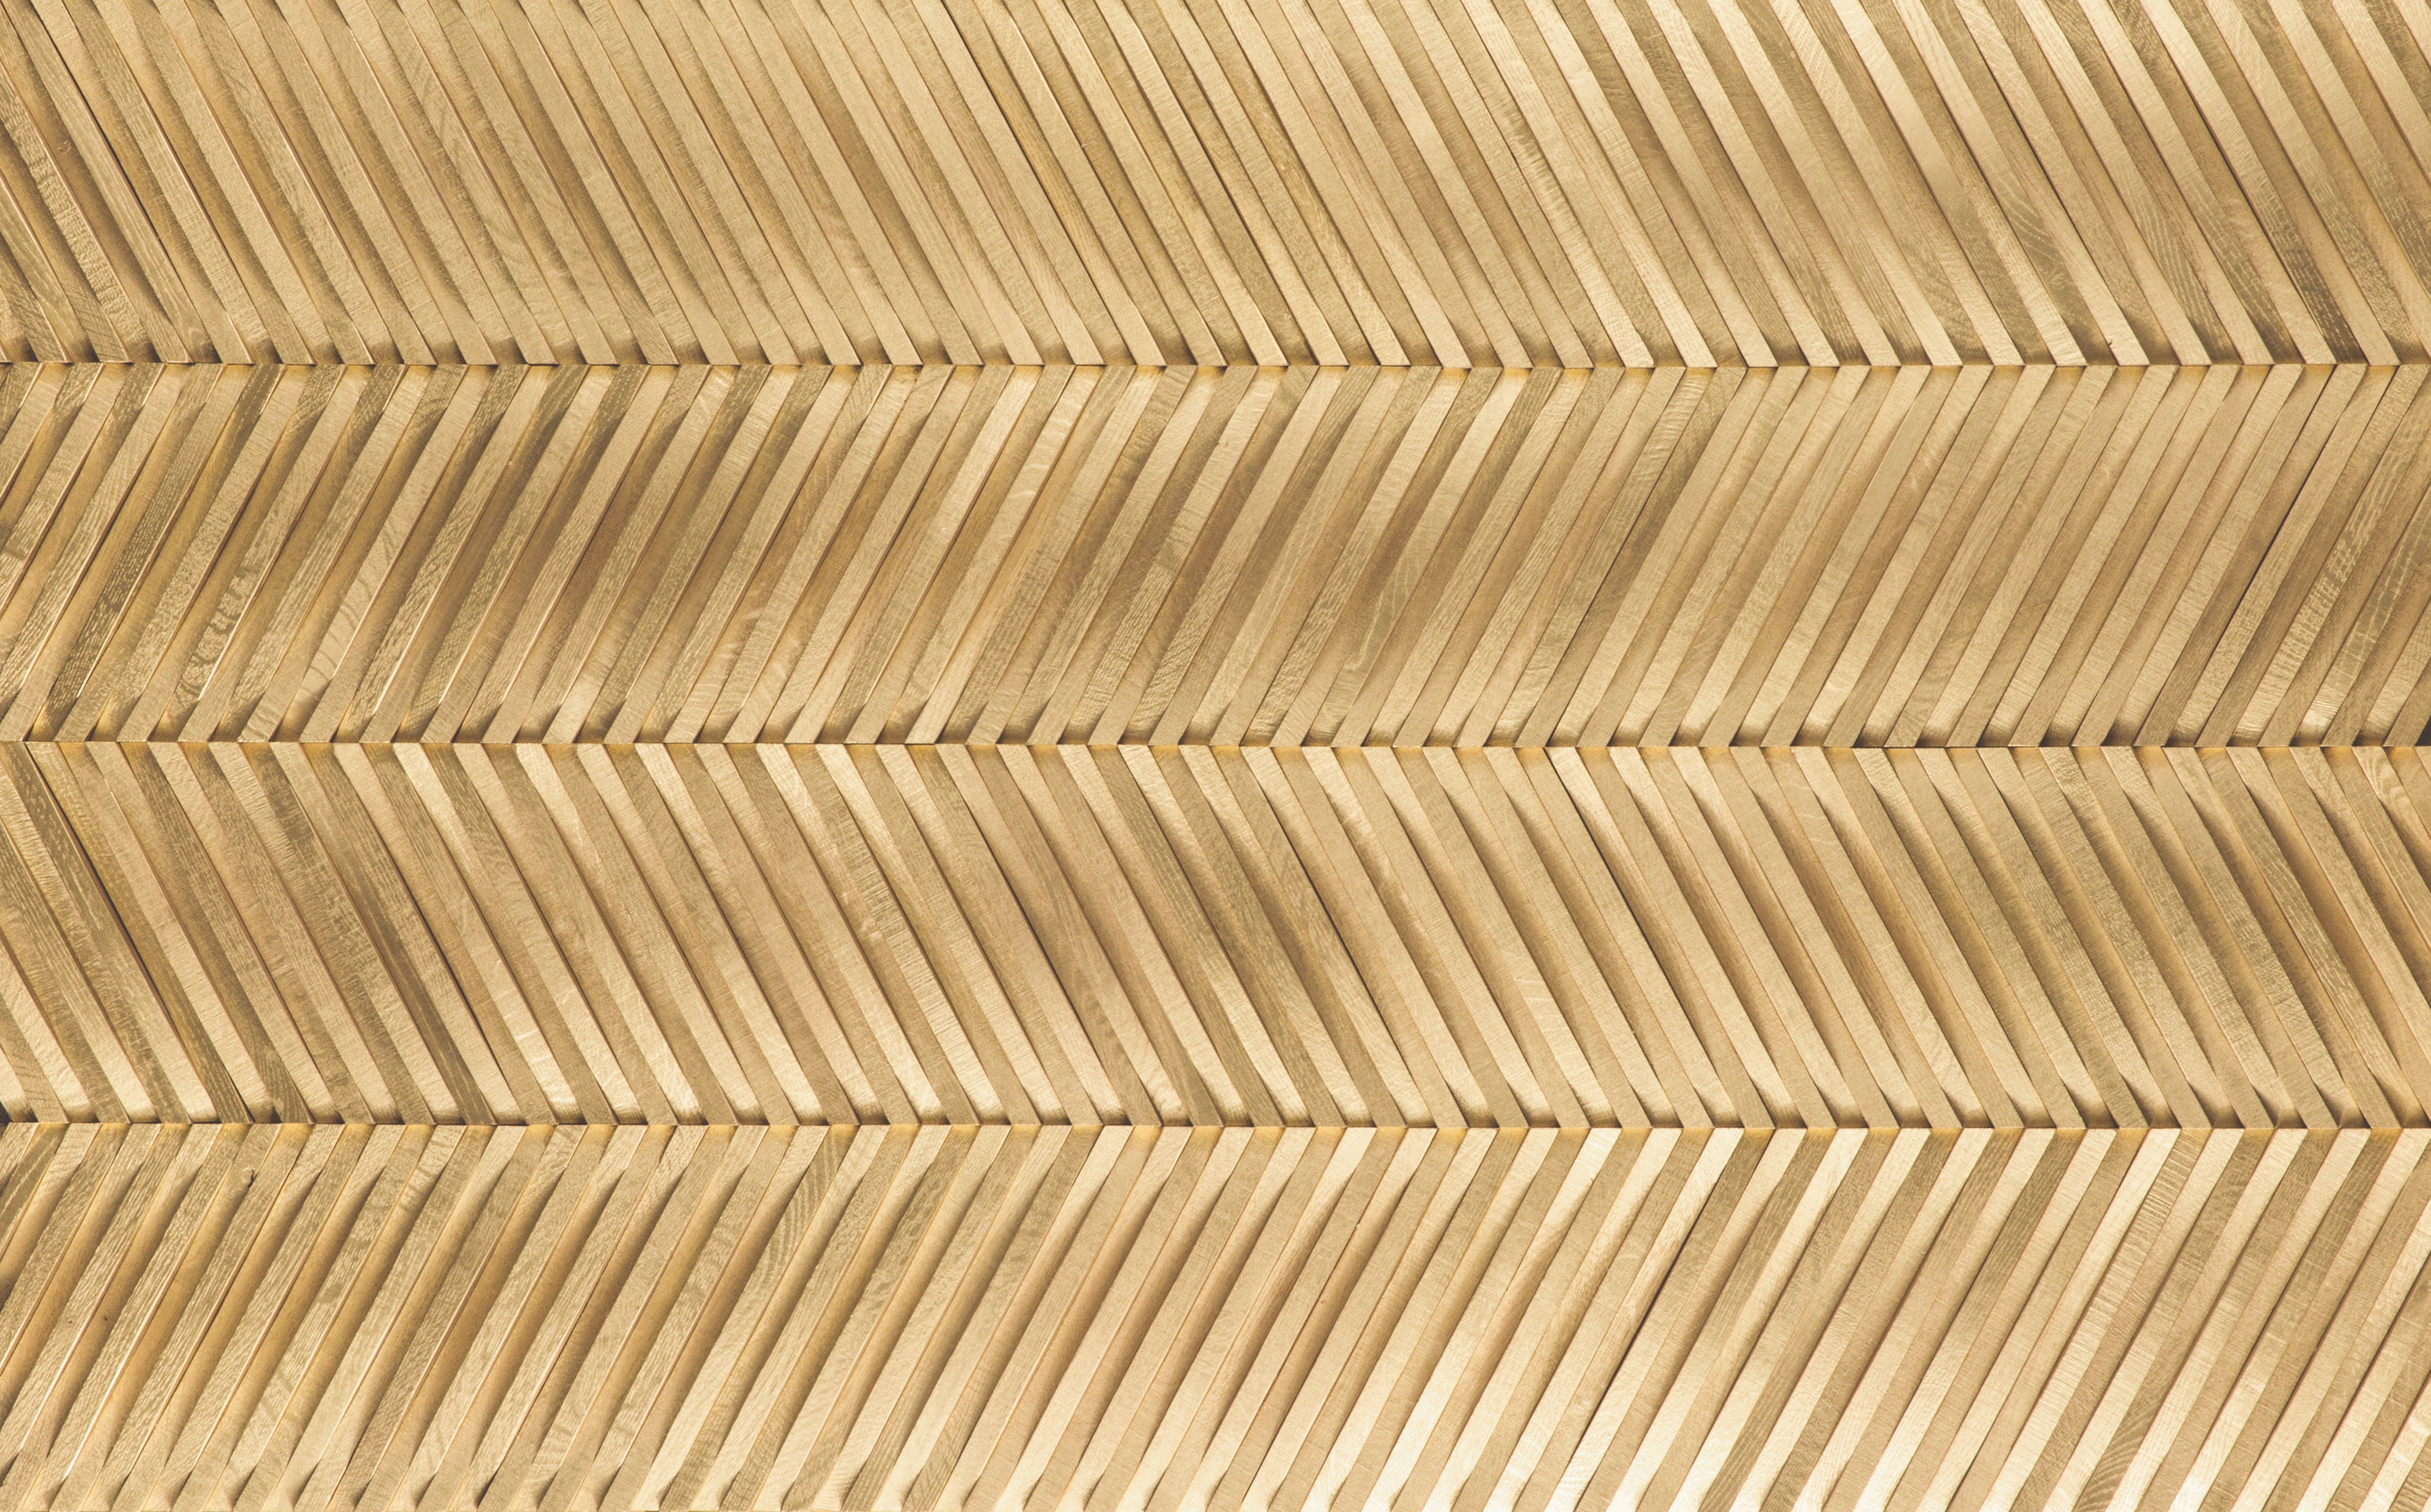 duchateau inceptiv curva chevron gold oak three dimensional wall natural wood panel lacquer for interior use distributed by surface group international